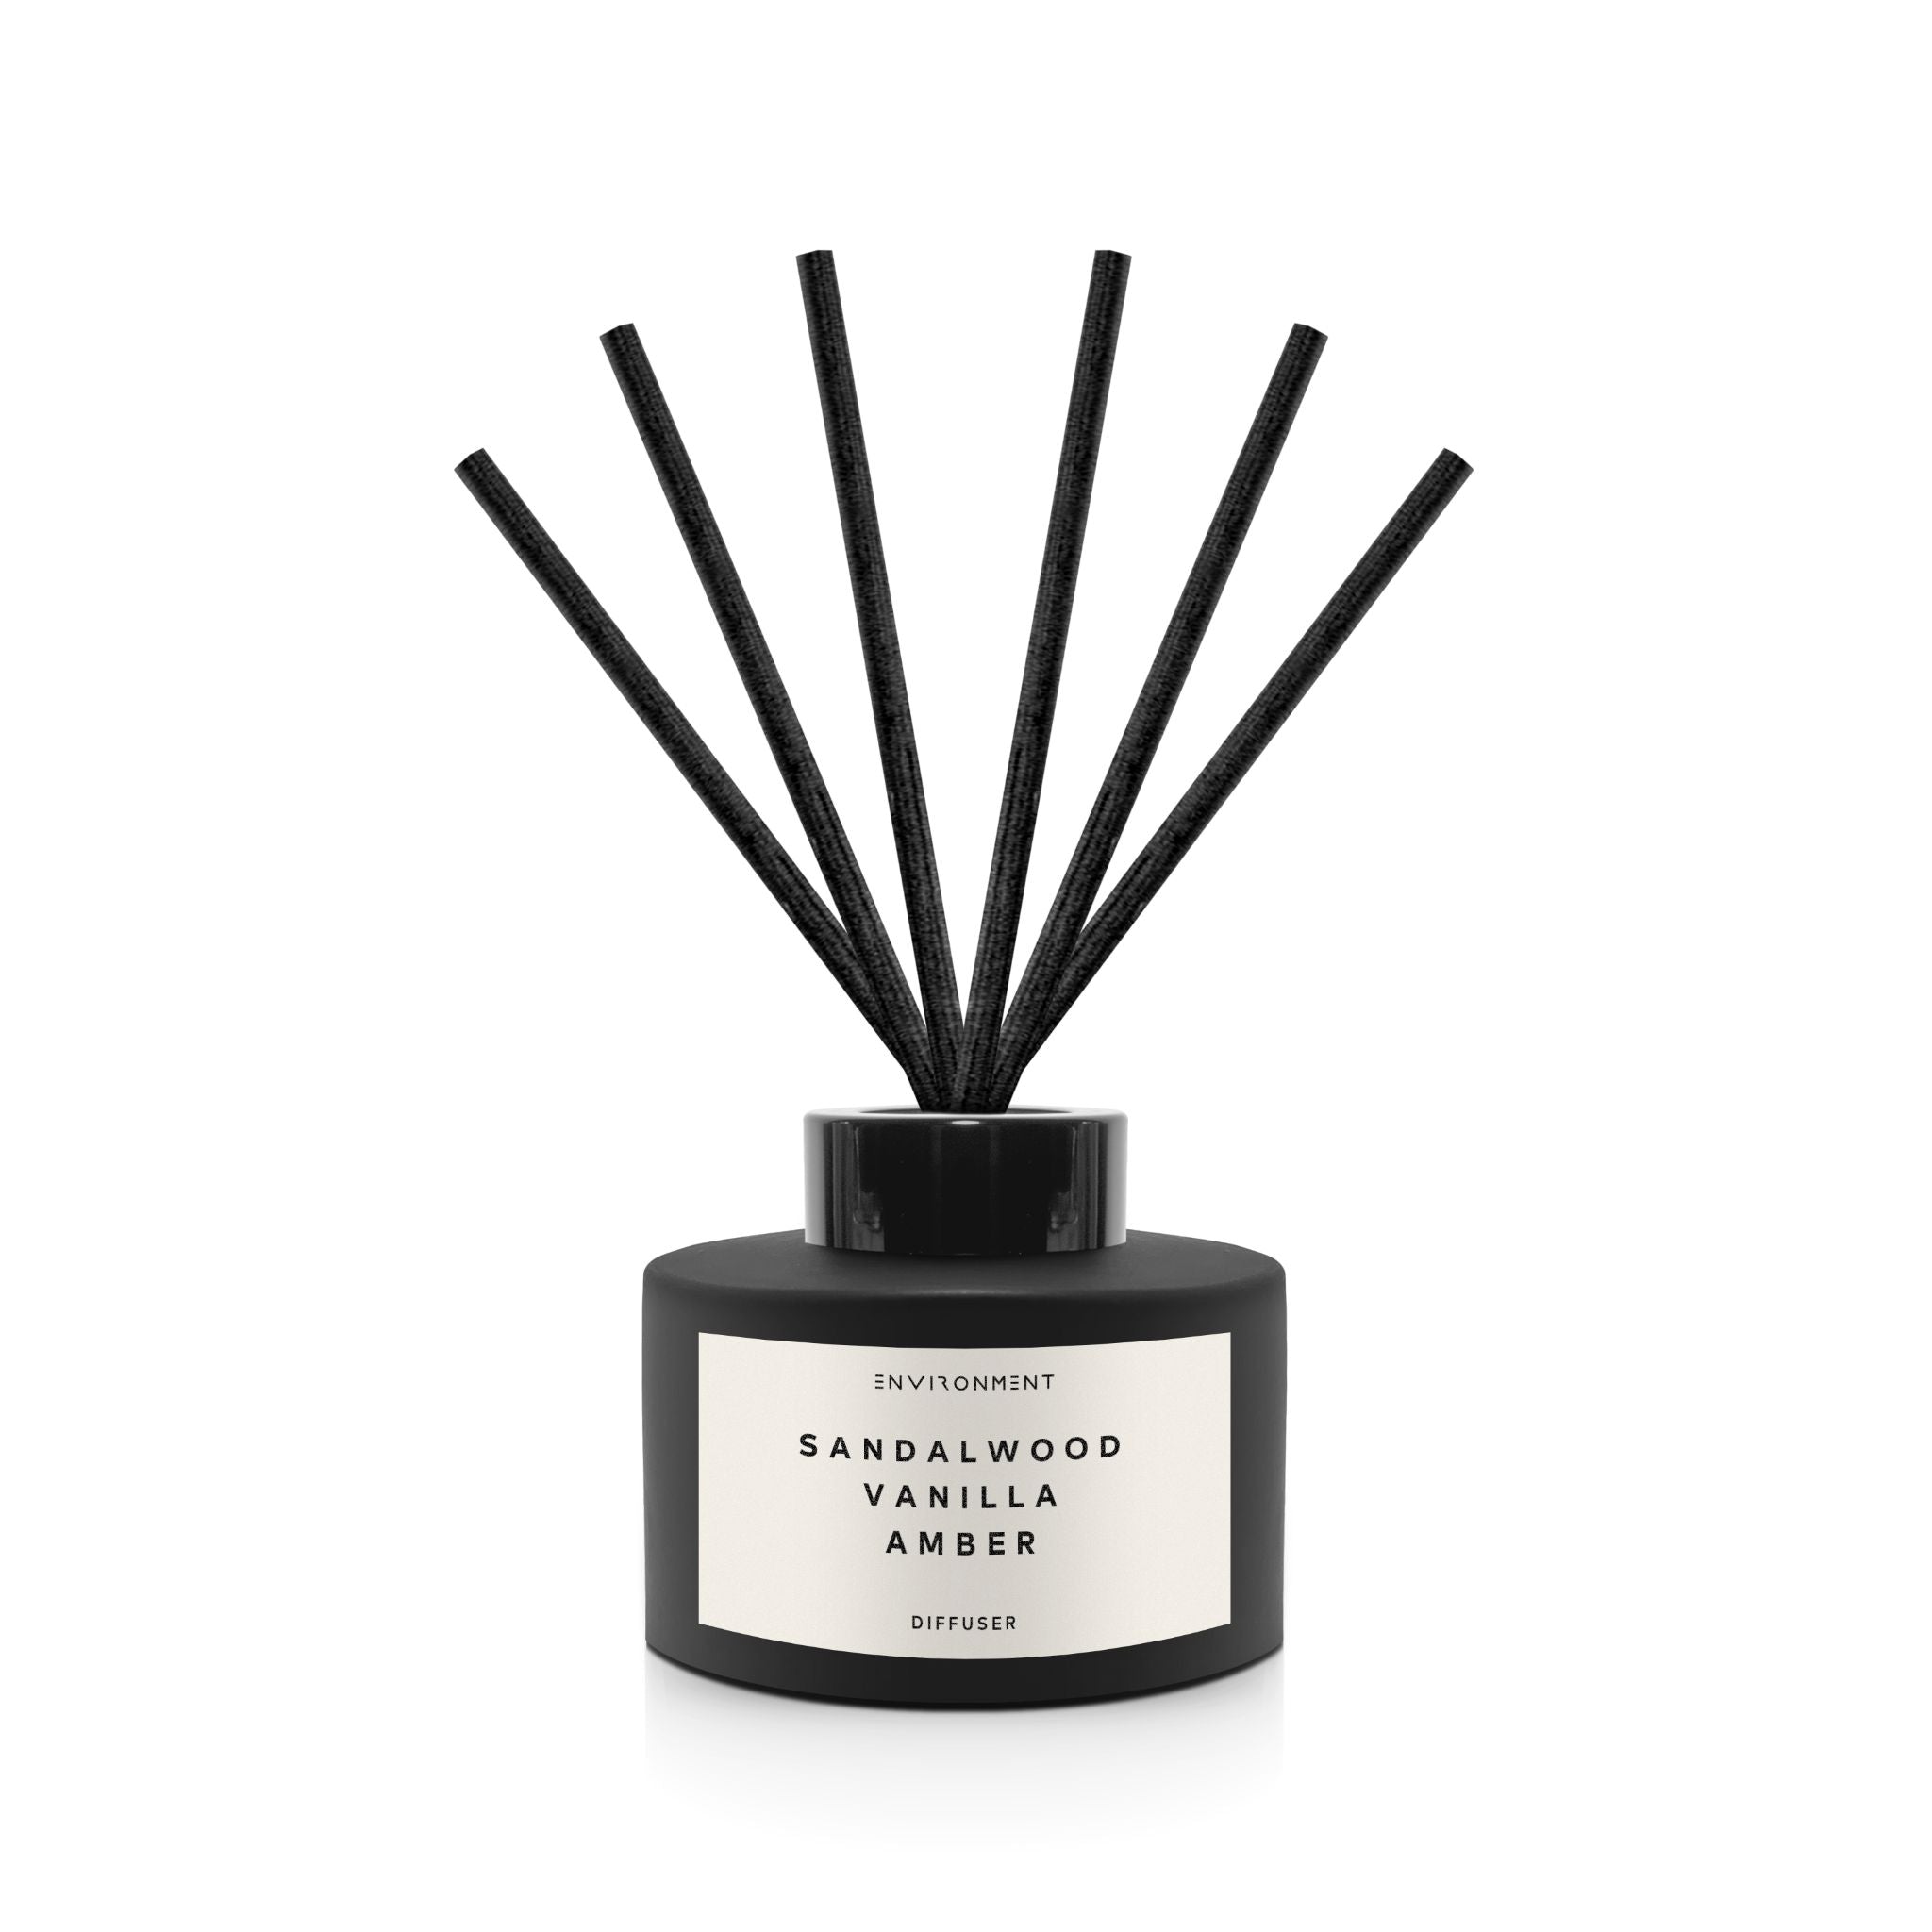 Sandalwood | Vanilla | Amber 200ml Diffuser and 8oz Candle Gift Pack (Inspired by Hotel Costes®)